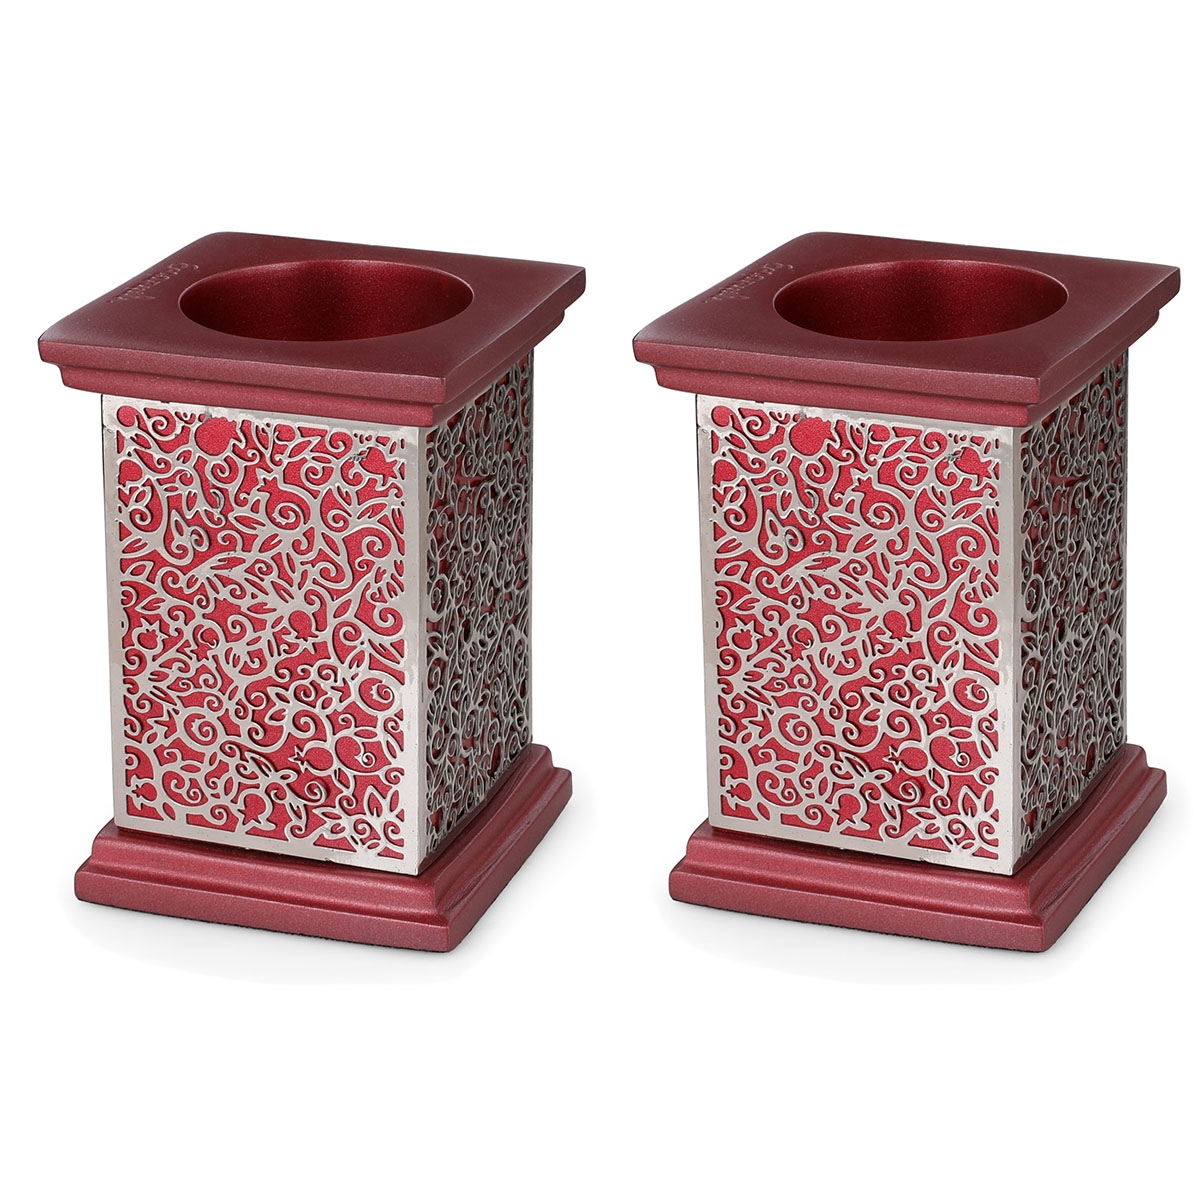 Yair Emanuel Anodized Aluminum Pomegranate Candlesticks with Laser-Cut Metal – Red - 1